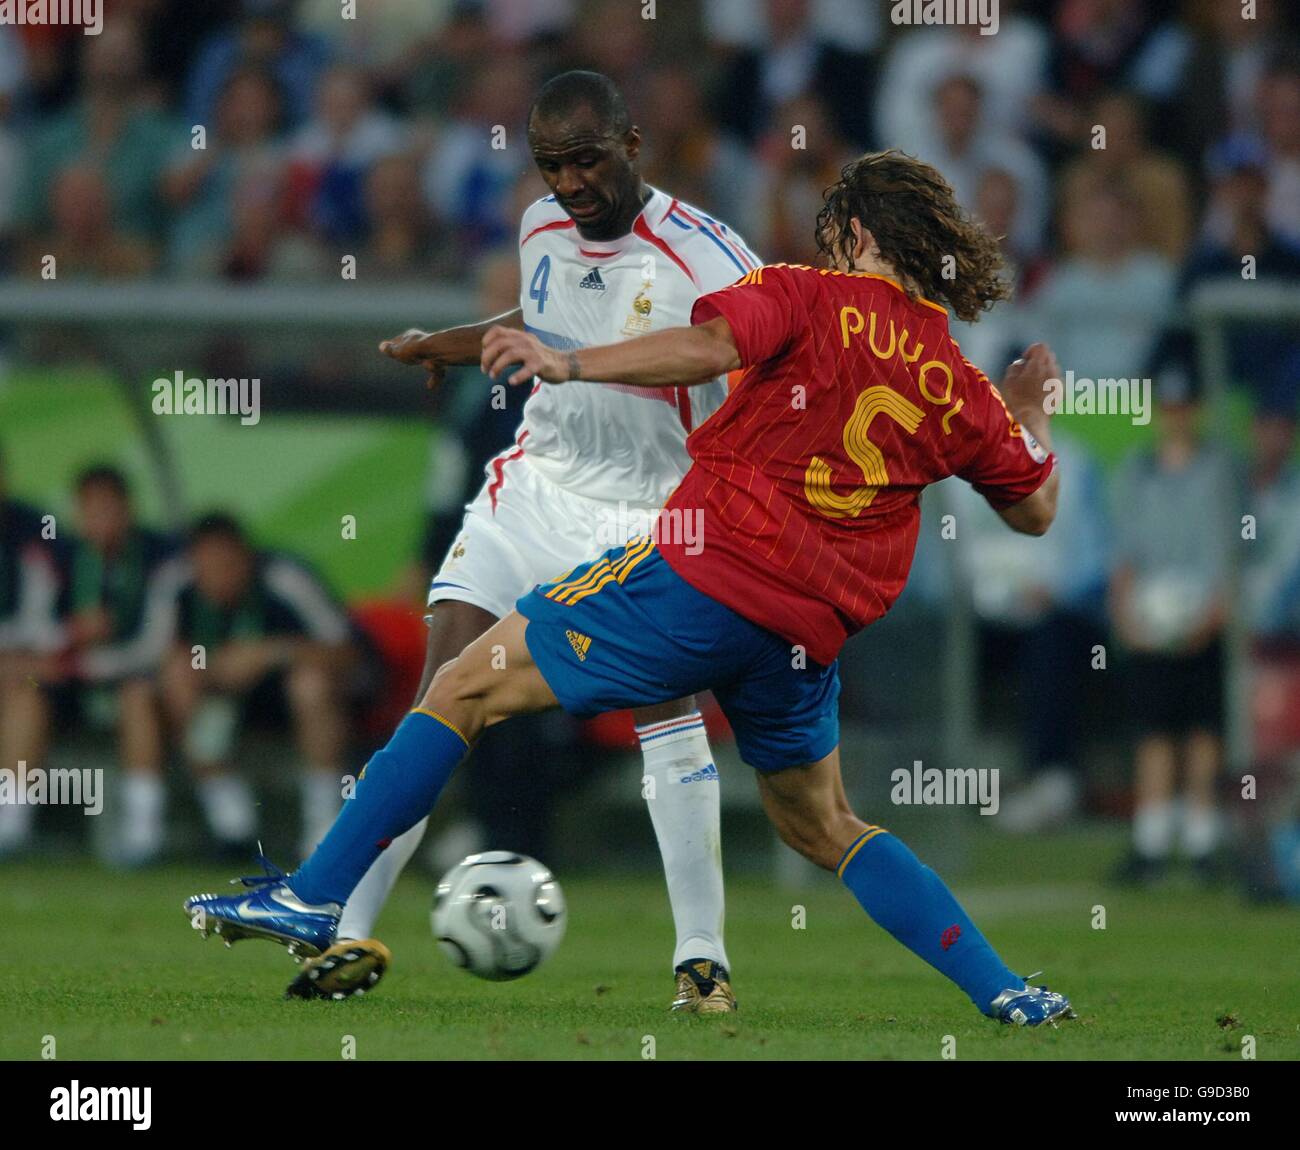 Soccer - 2006 FIFA World Cup Germany - Second Round - Spain v France - AWD Arena. Carles Puyol, Spain and Patrick Vieira, France battle for the ball Stock Photo